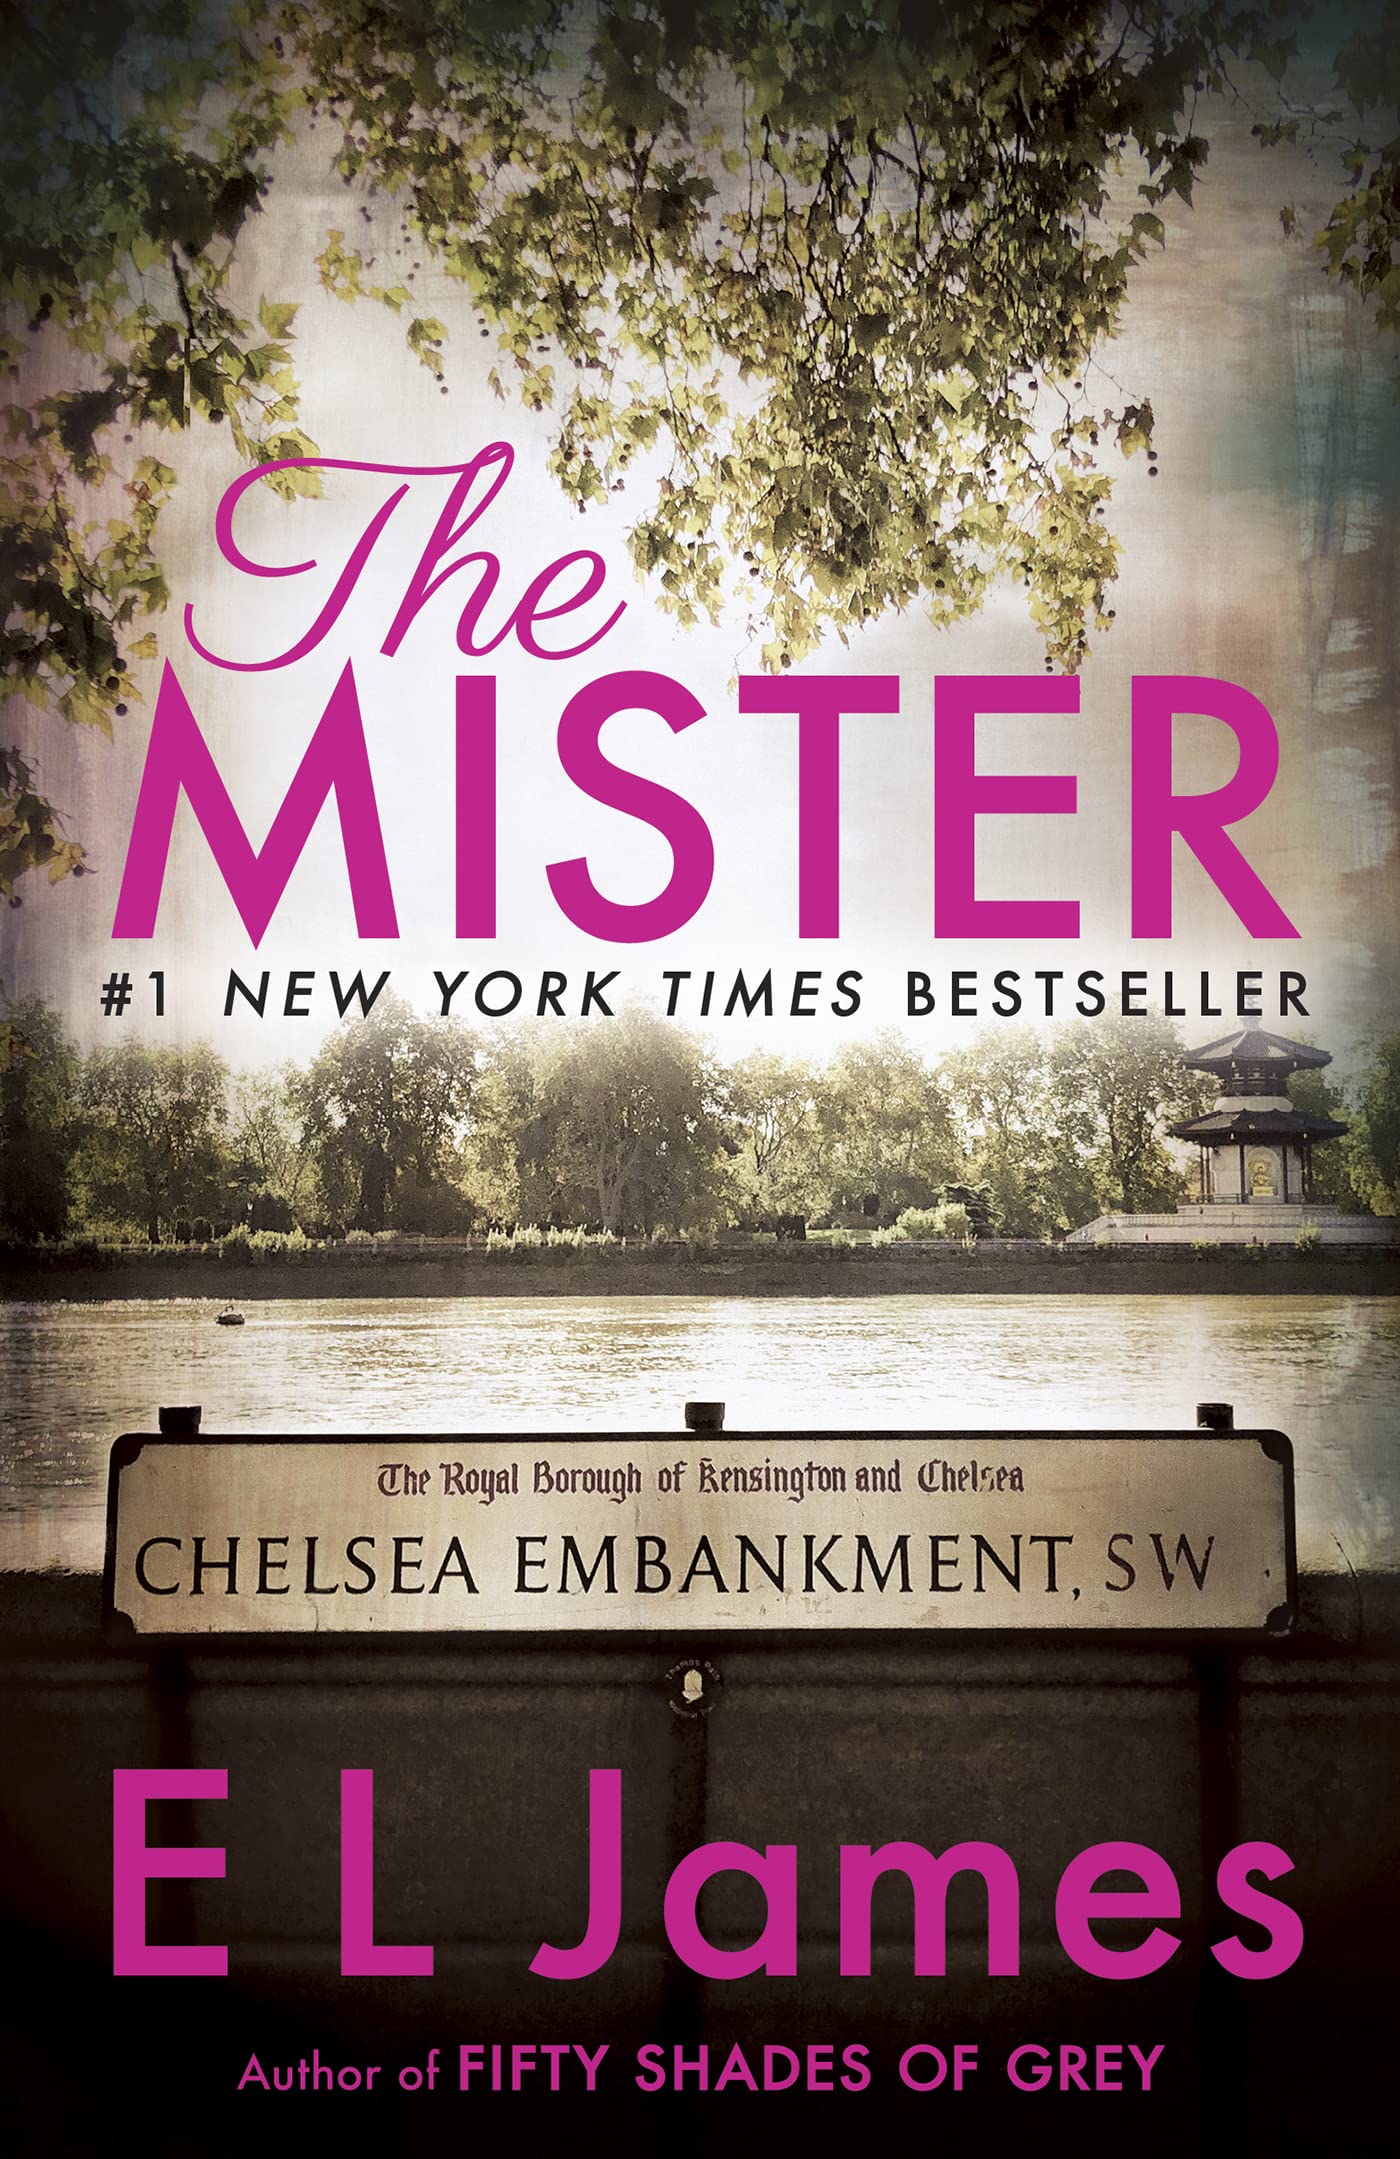 The Mister (Mister & Missus Book 1)